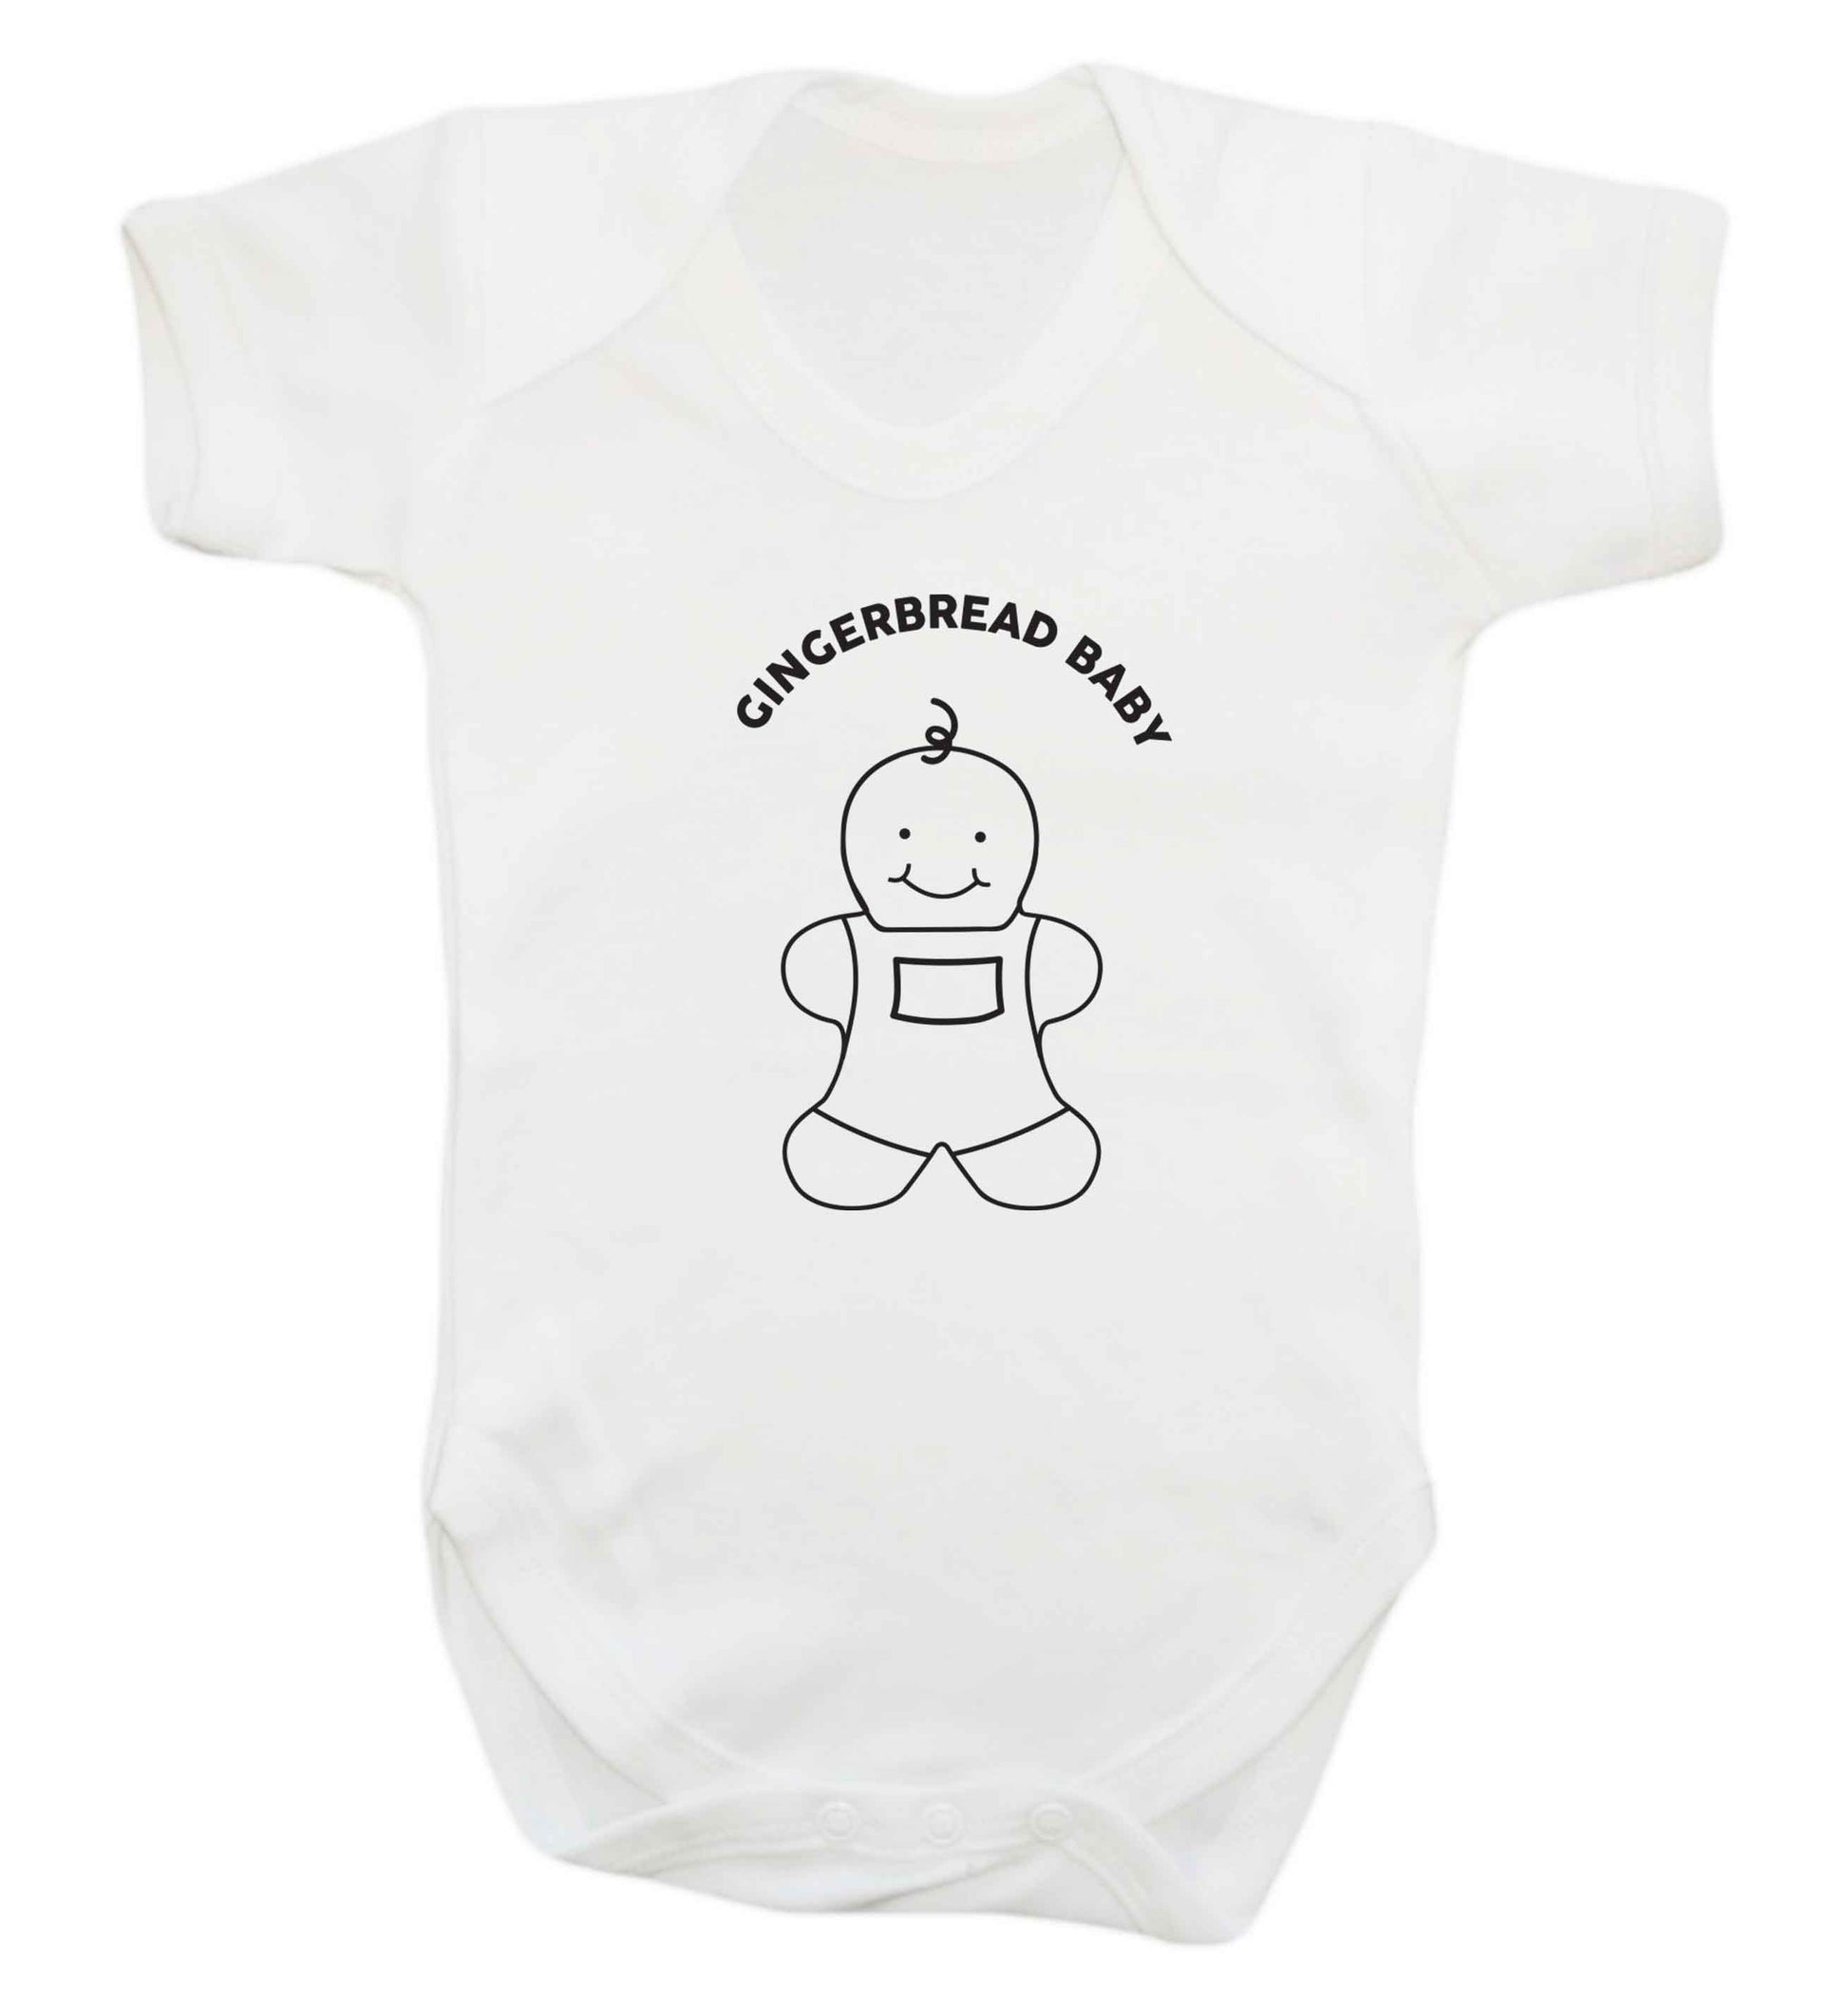 Gingerbread baby baby vest white 18-24 months